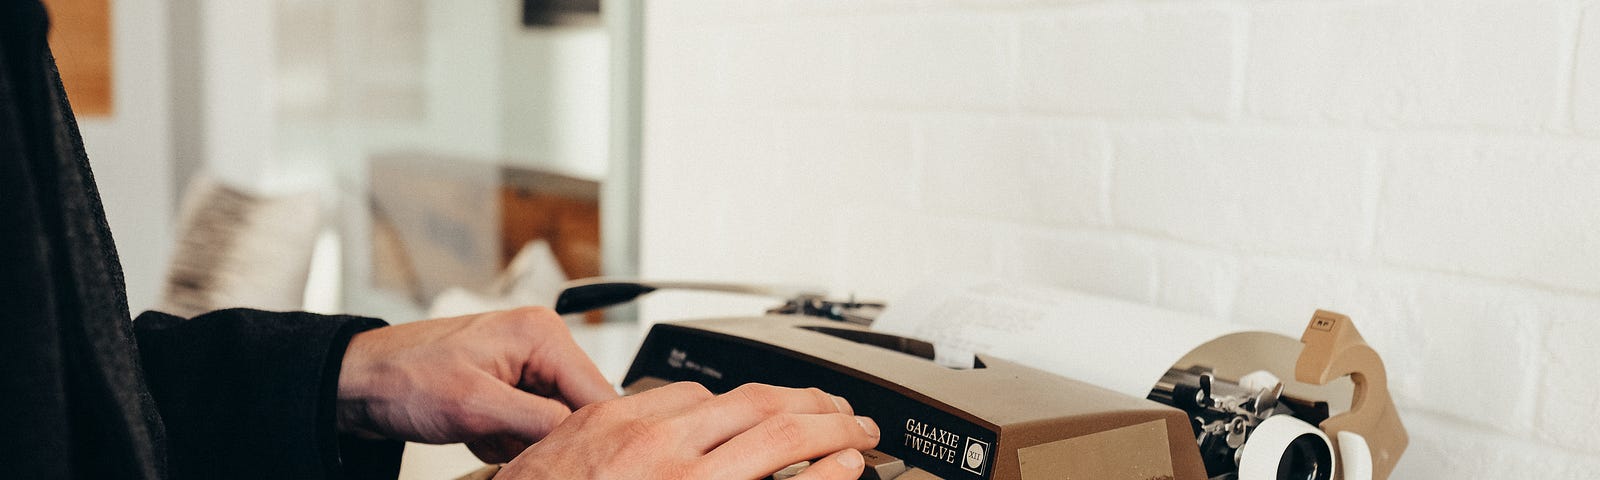 Picture of hands typing on a typewriter